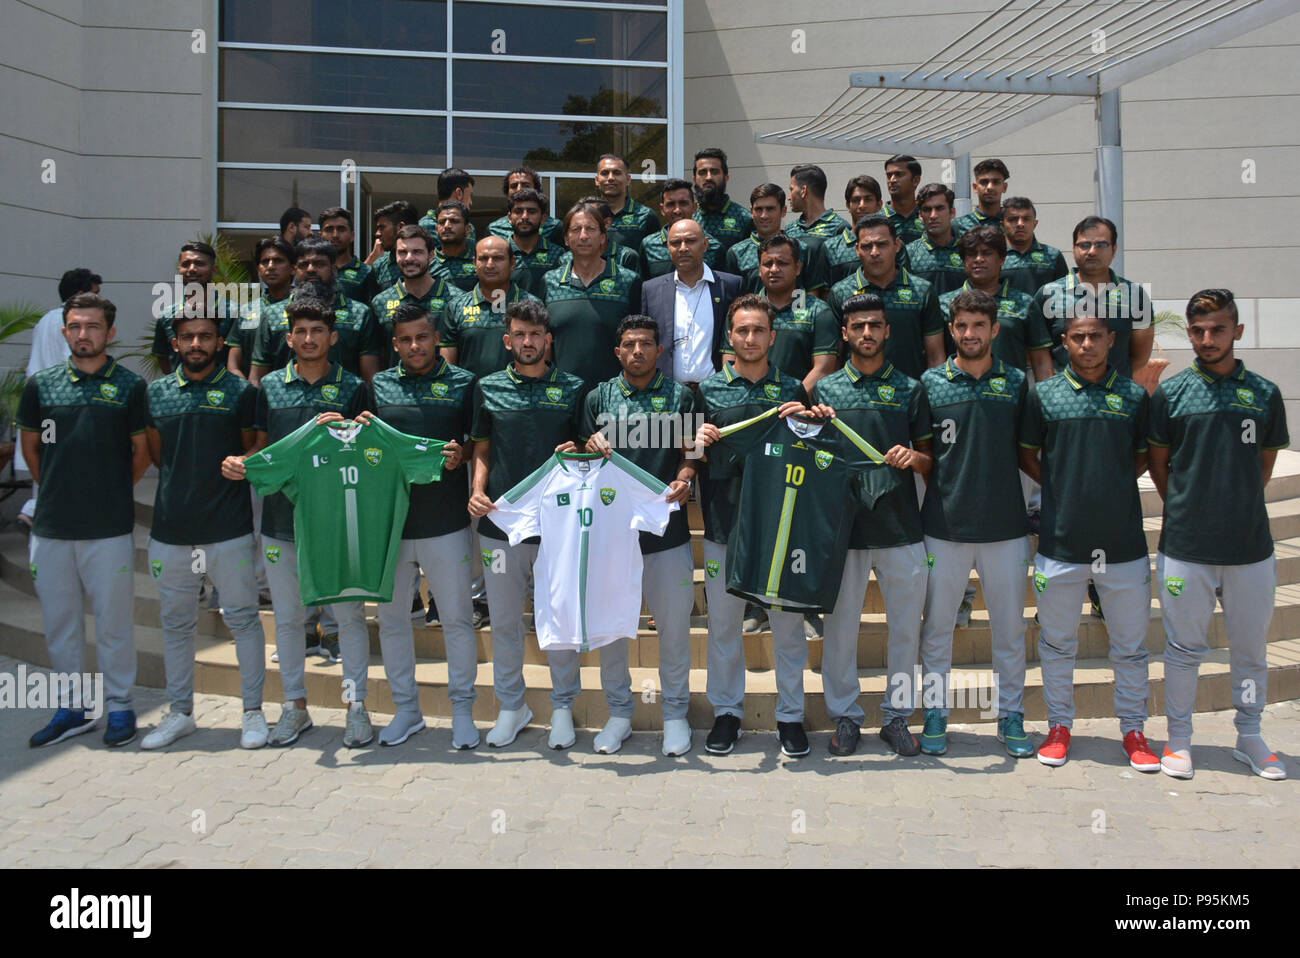 https://c8.alamy.com/comp/P95KM5/lahore-pakistan-15th-july-2018-pakistani-officials-brazilian-head-coach-jose-antonio-nogueira-coach-shahid-anwar-media-marketing-manager-shahid-khokhar-and-players-of-national-football-team-unveiling-the-kits-of-upcoming-event-during-a-press-conference-at-pakistan-football-federation-office-in-lahore-credit-rana-sajid-hussainpacific-pressalamy-live-news-P95KM5.jpg